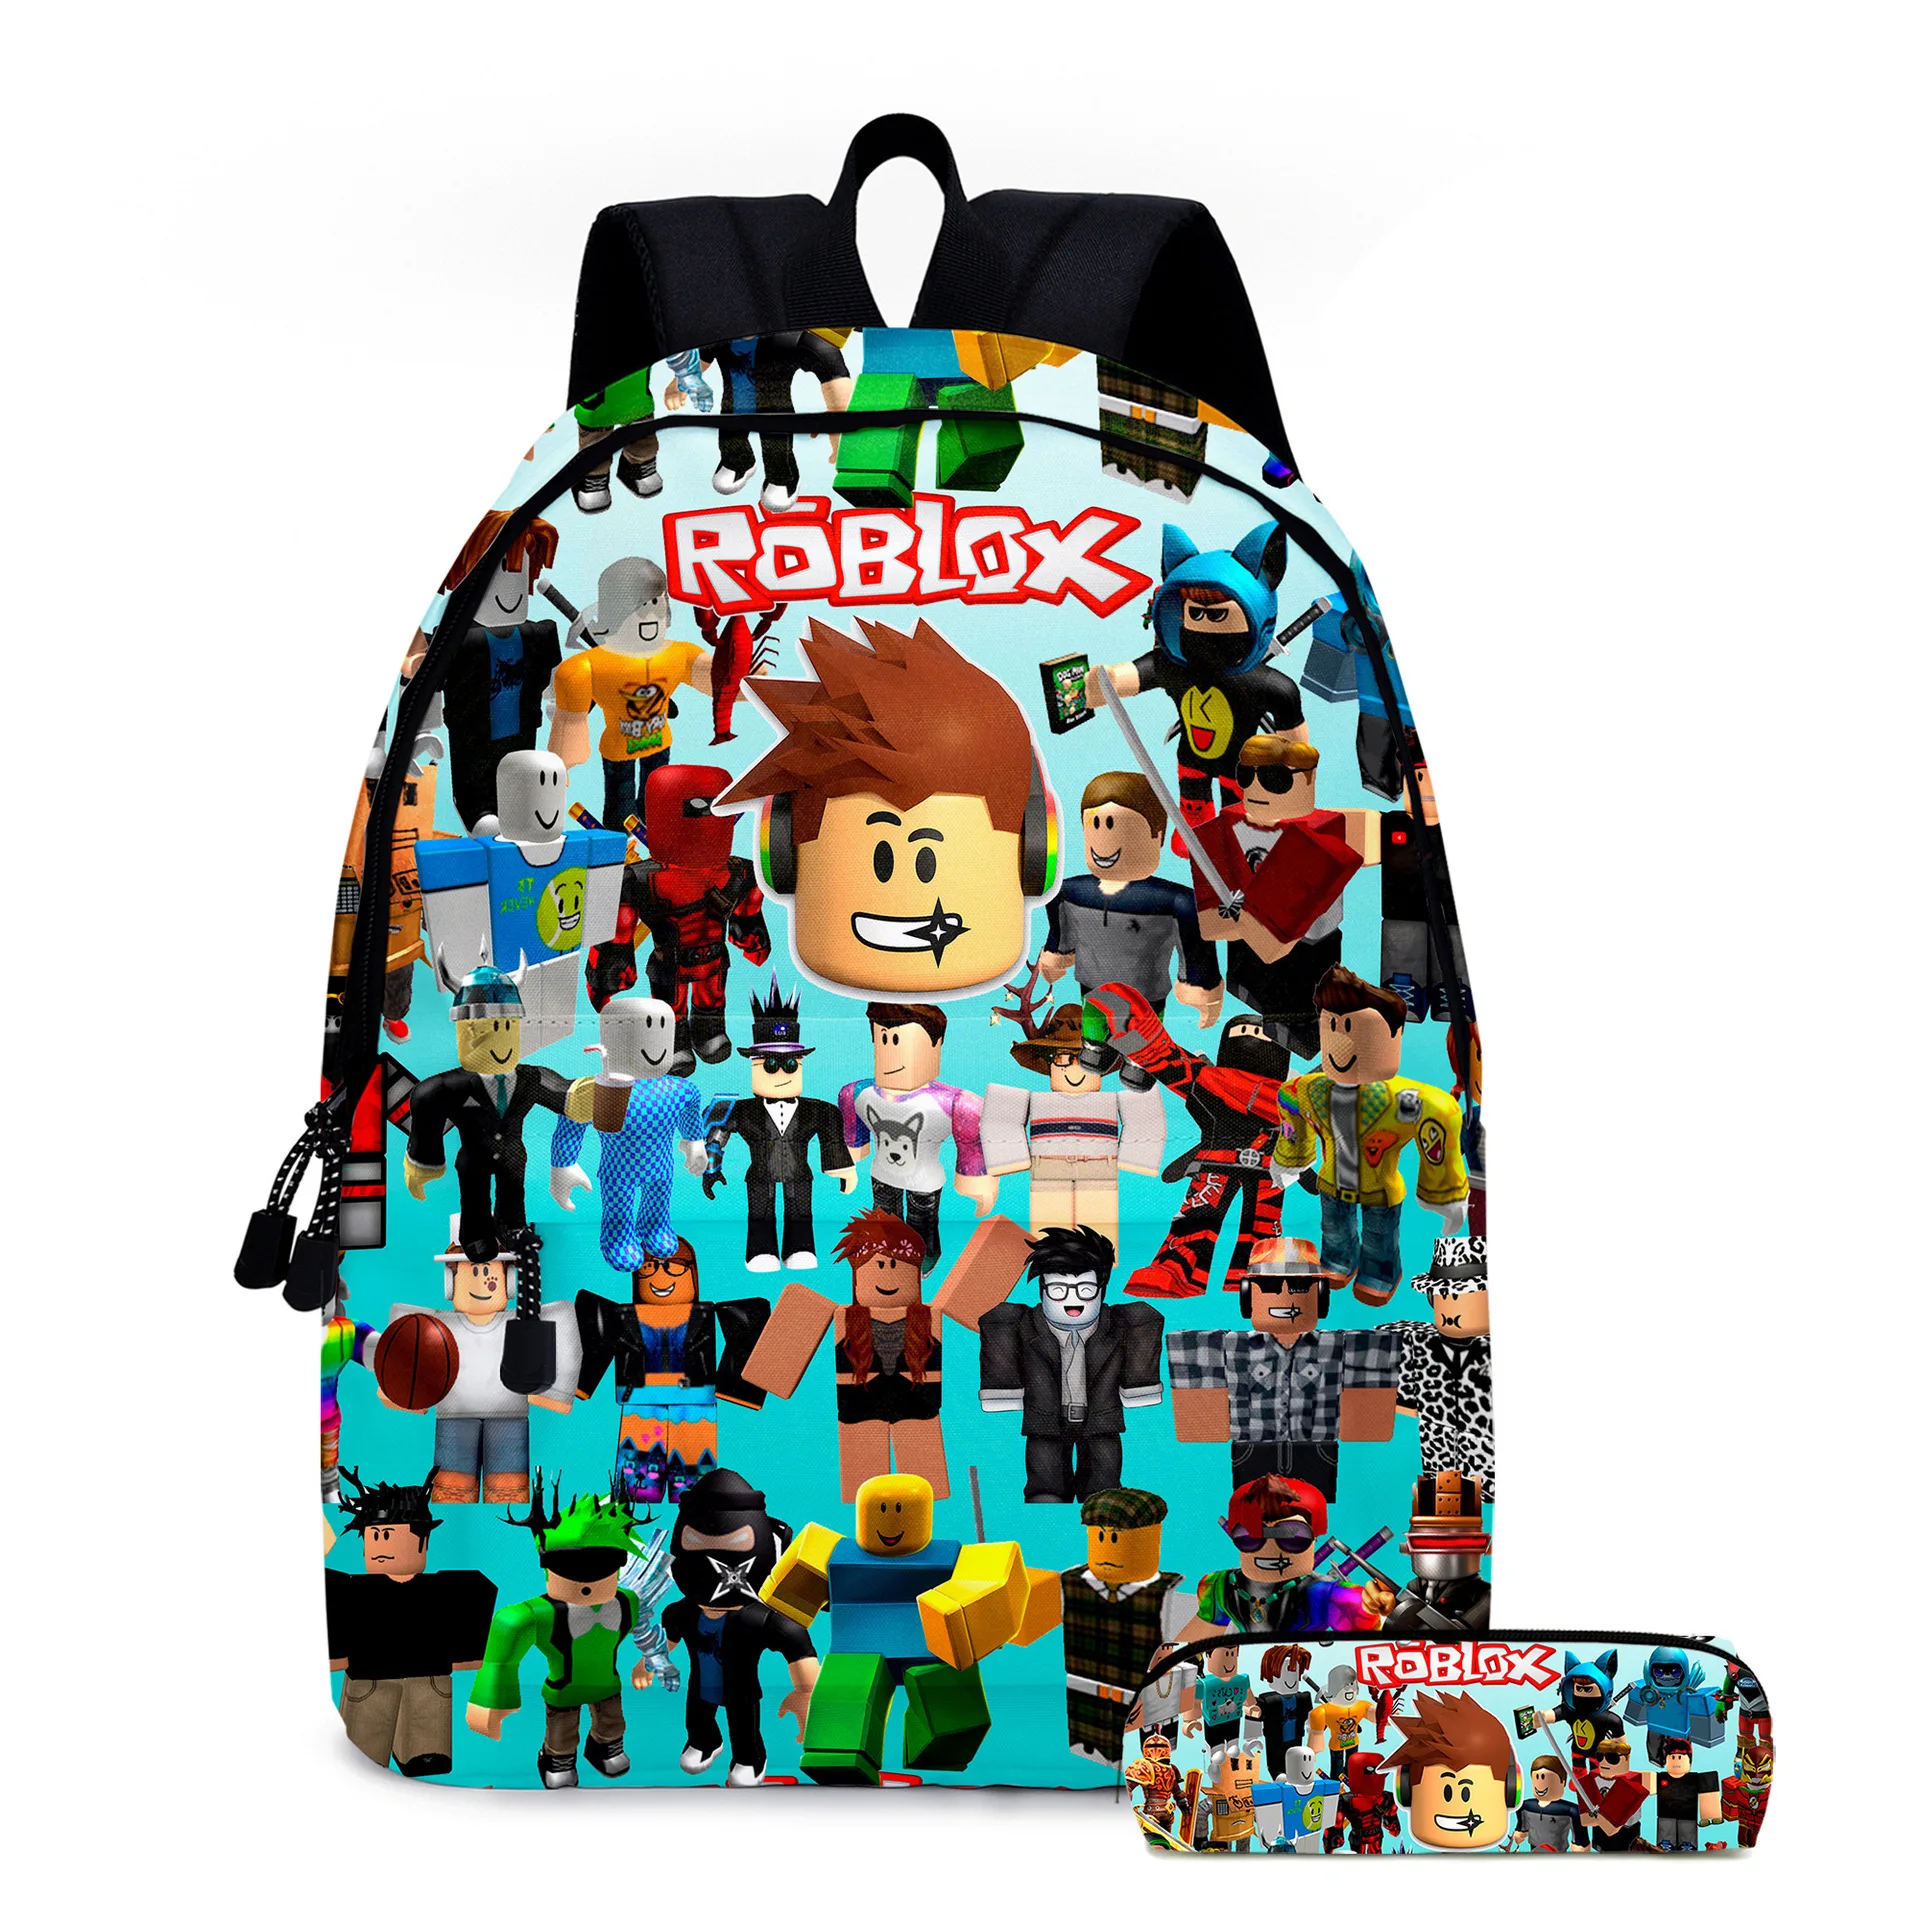 

Primary School Student Children'S Cartoon Anime Geometric Ro blox Black Boy Backpack Bag For School College 3 In 1 School Bags, Customized color